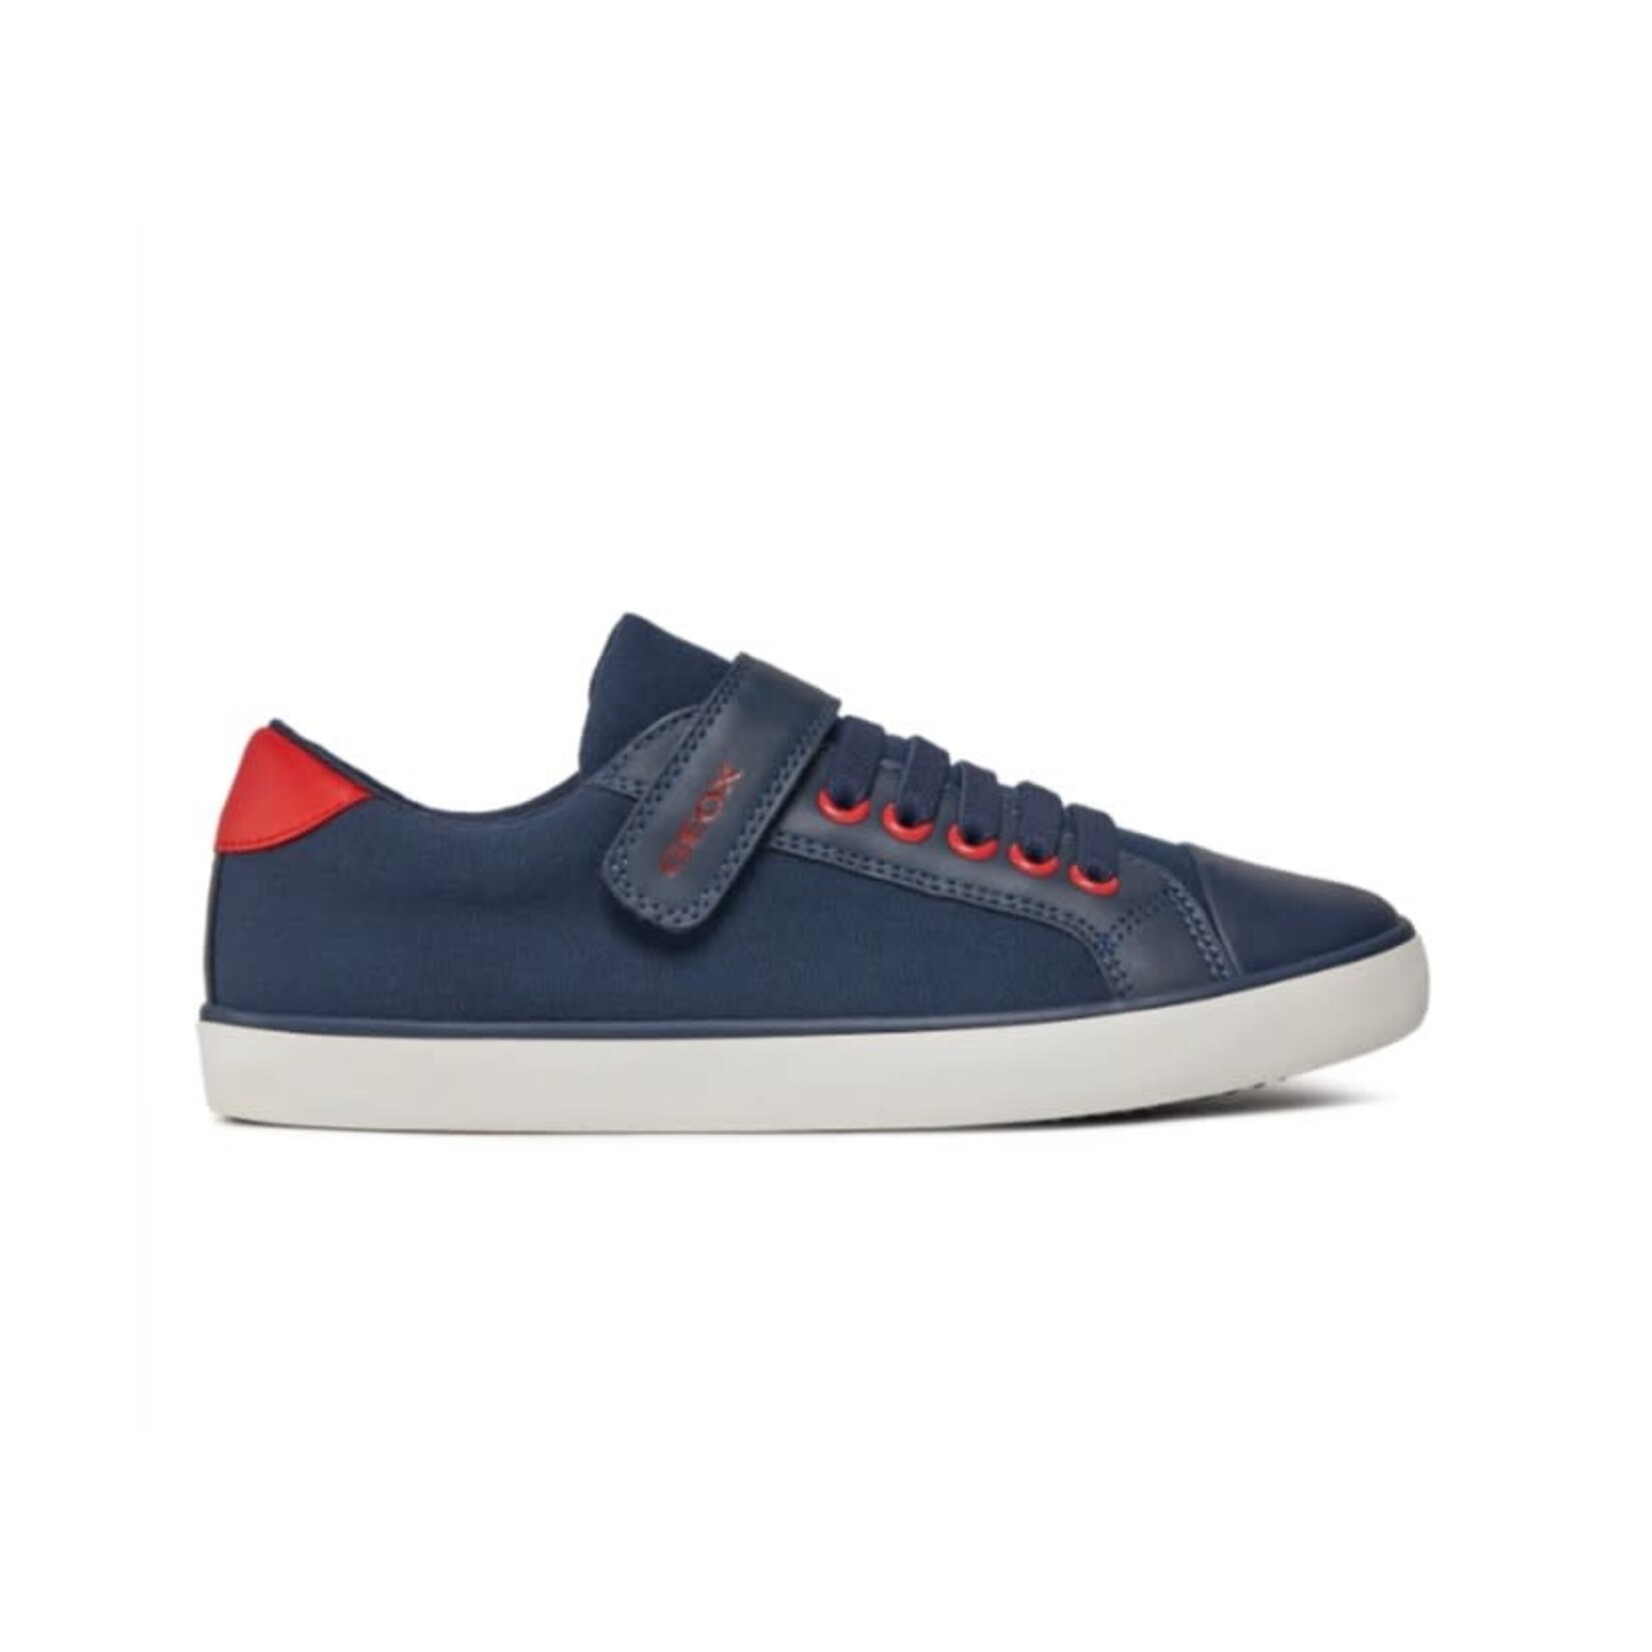 Geox GEOX - Navy synthetic leather and textile sneakers 'Gisli - Navy/Red'